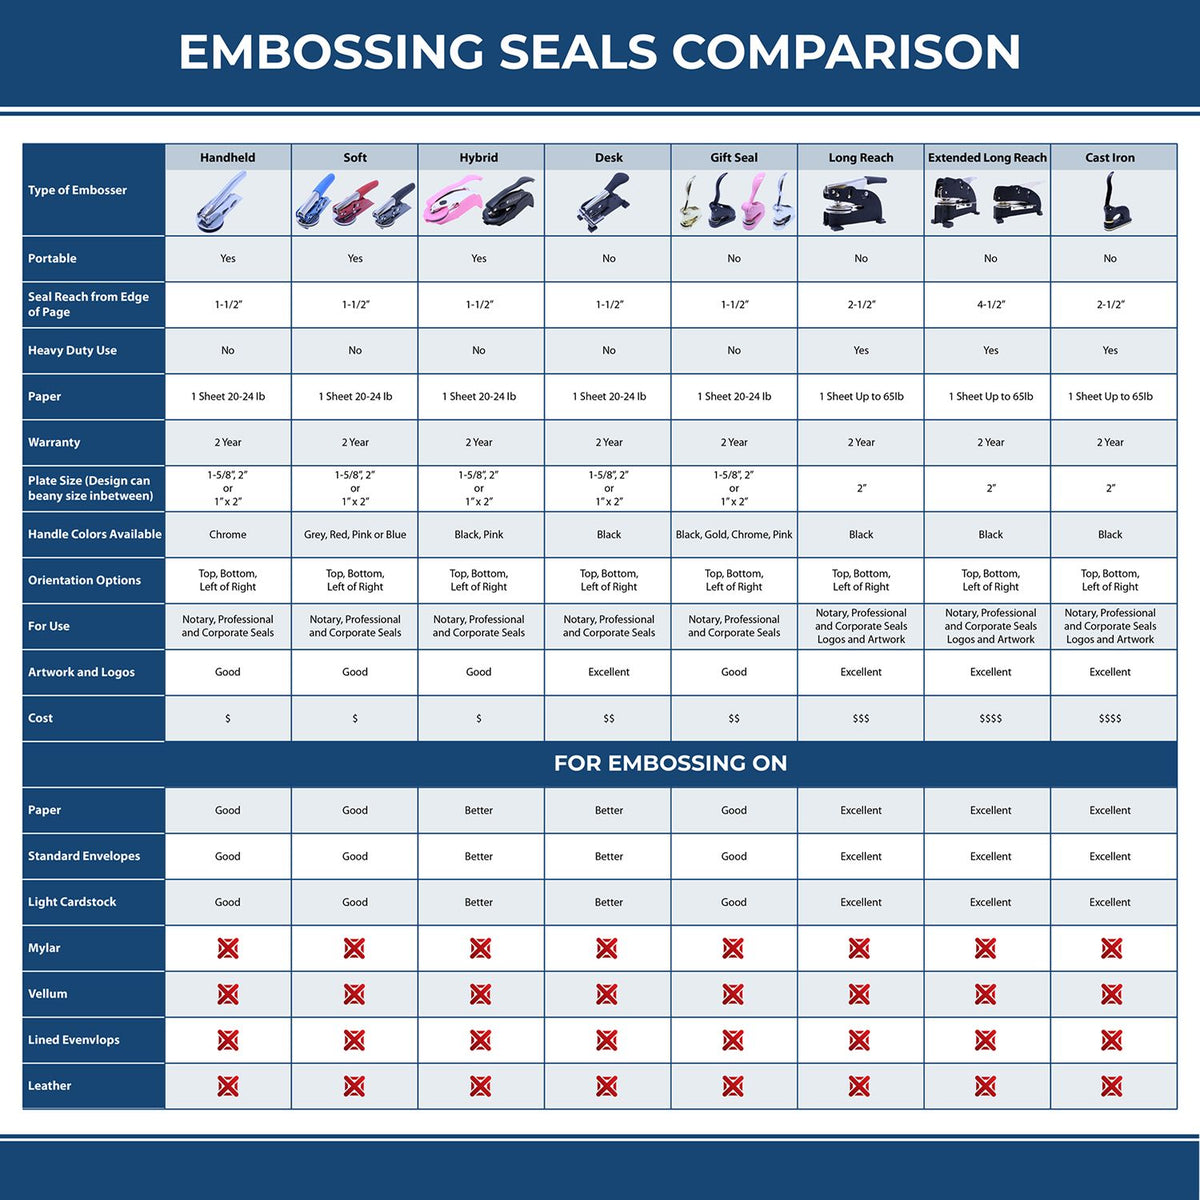 A comparison chart for the different types of mount models available for the Extended Long Reach Arizona Surveyor Embosser.